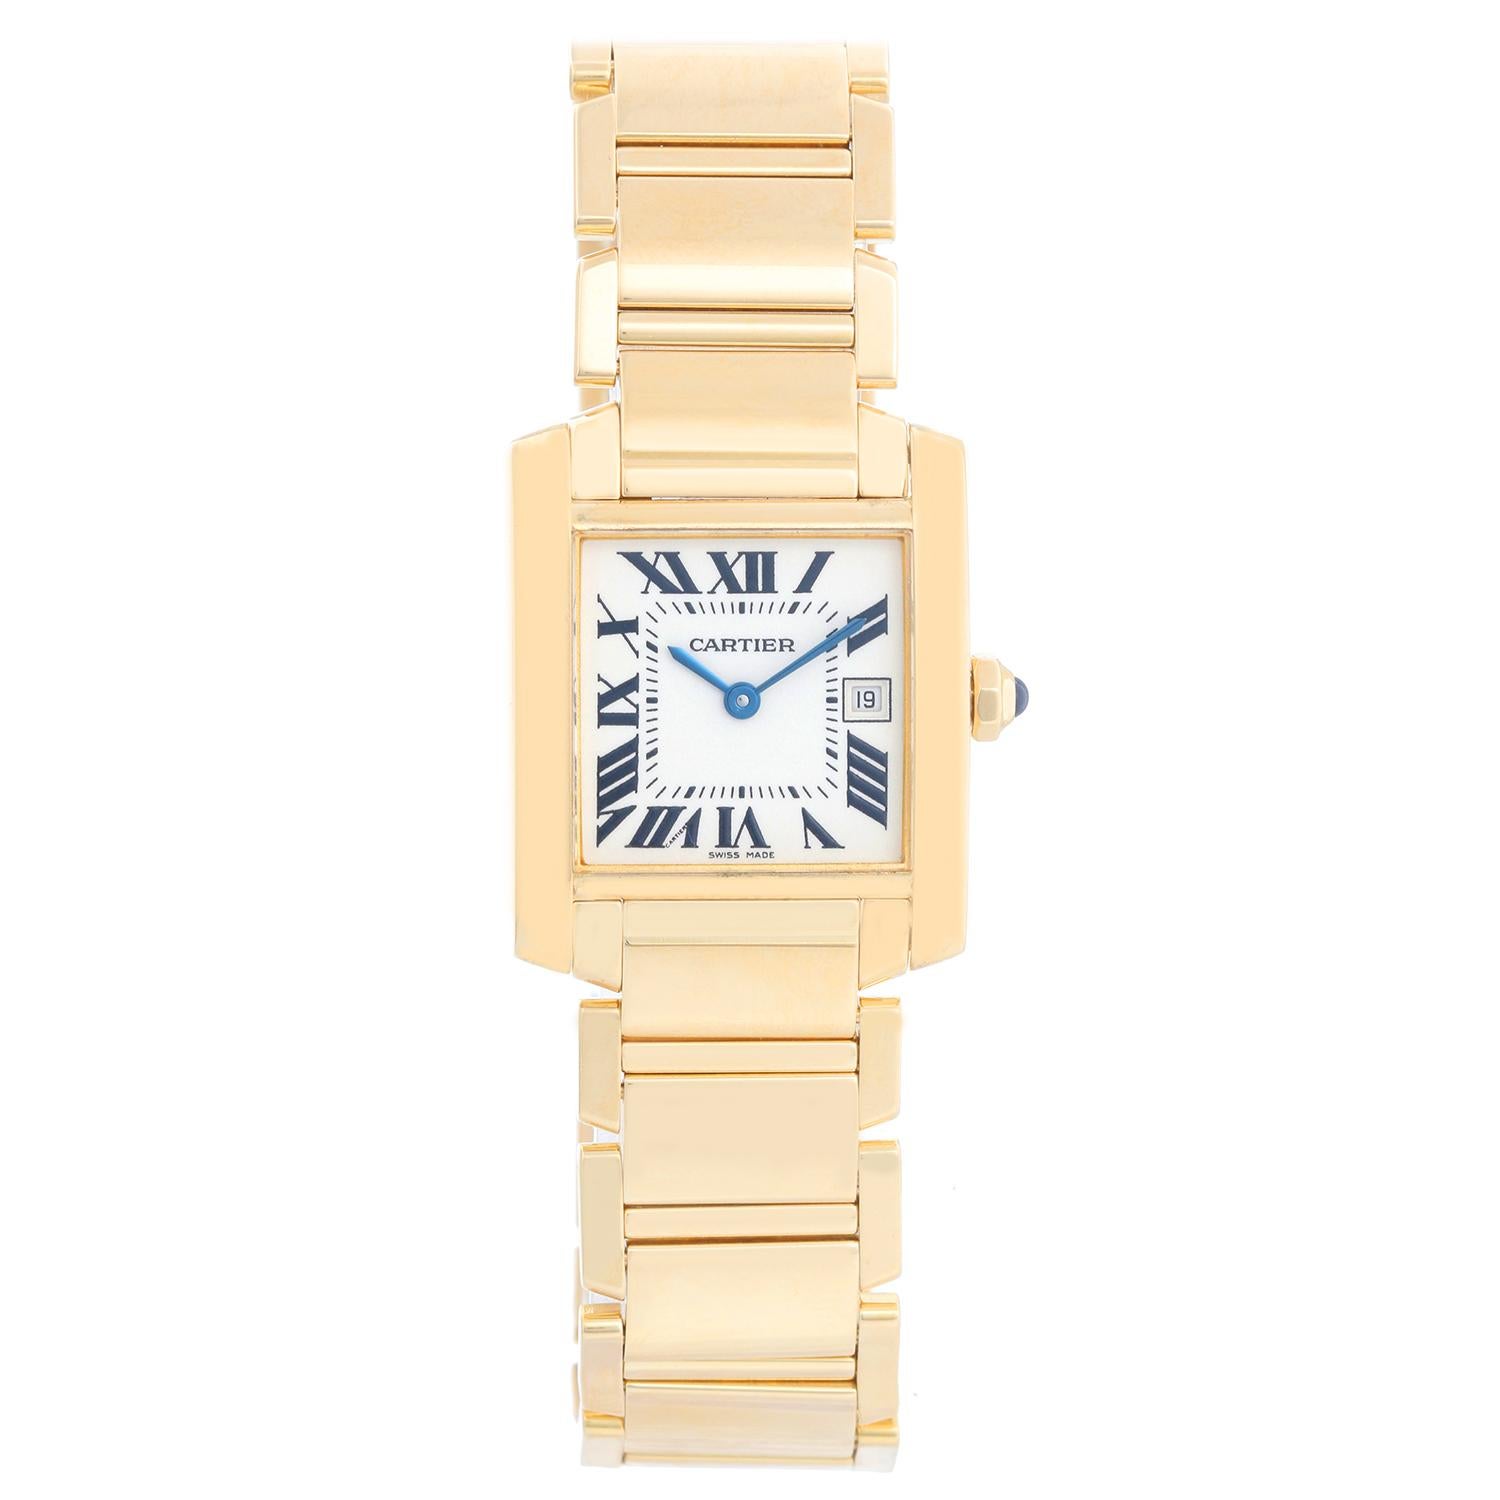 Cartier Tank Francaise Midsize 18k Yellow Gold Watch W50014N2 2466 - Quartz. 18k yellow gold  case; blue sapphire cabochon crown (25mm x 30mm).  Ivory colored dial with black Roman numerals; date at 3 o'clock. Cartier 18k yellow gold bracelet; will